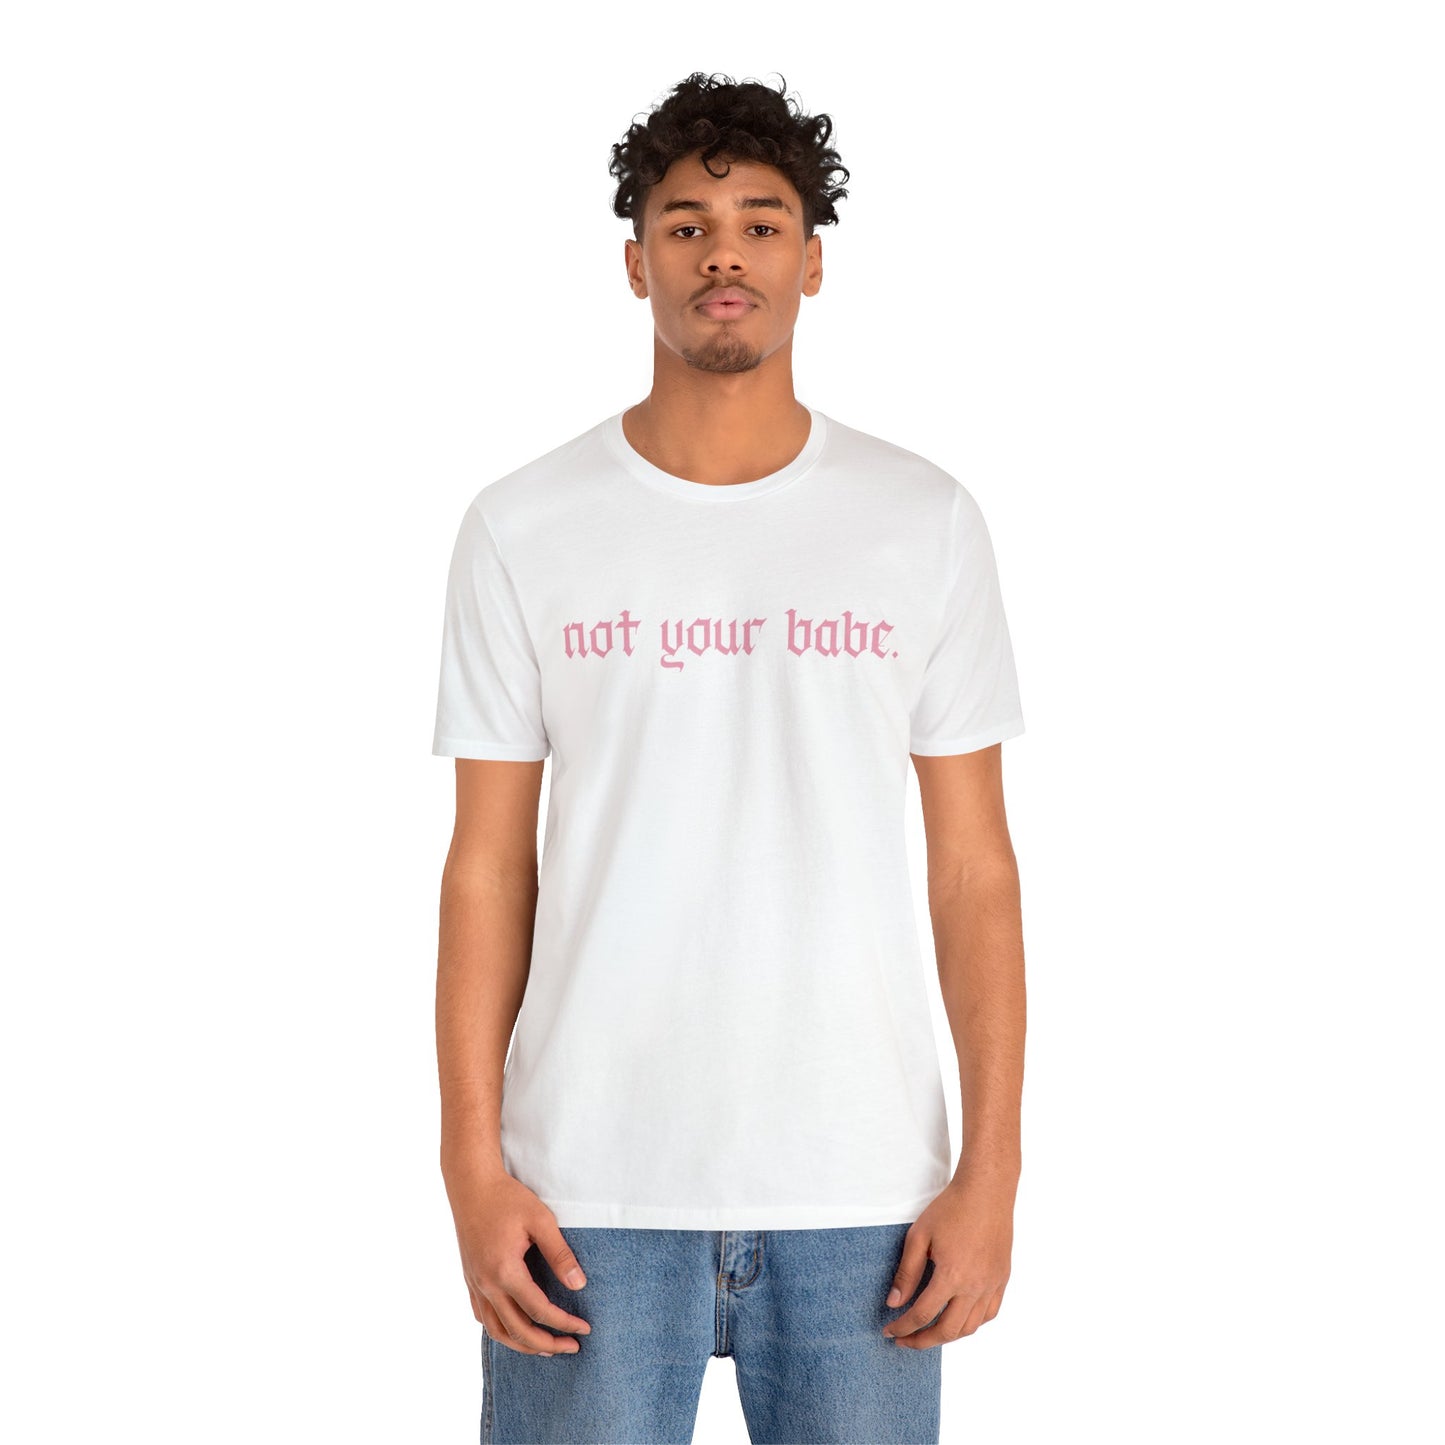 Not your babe T-shirt